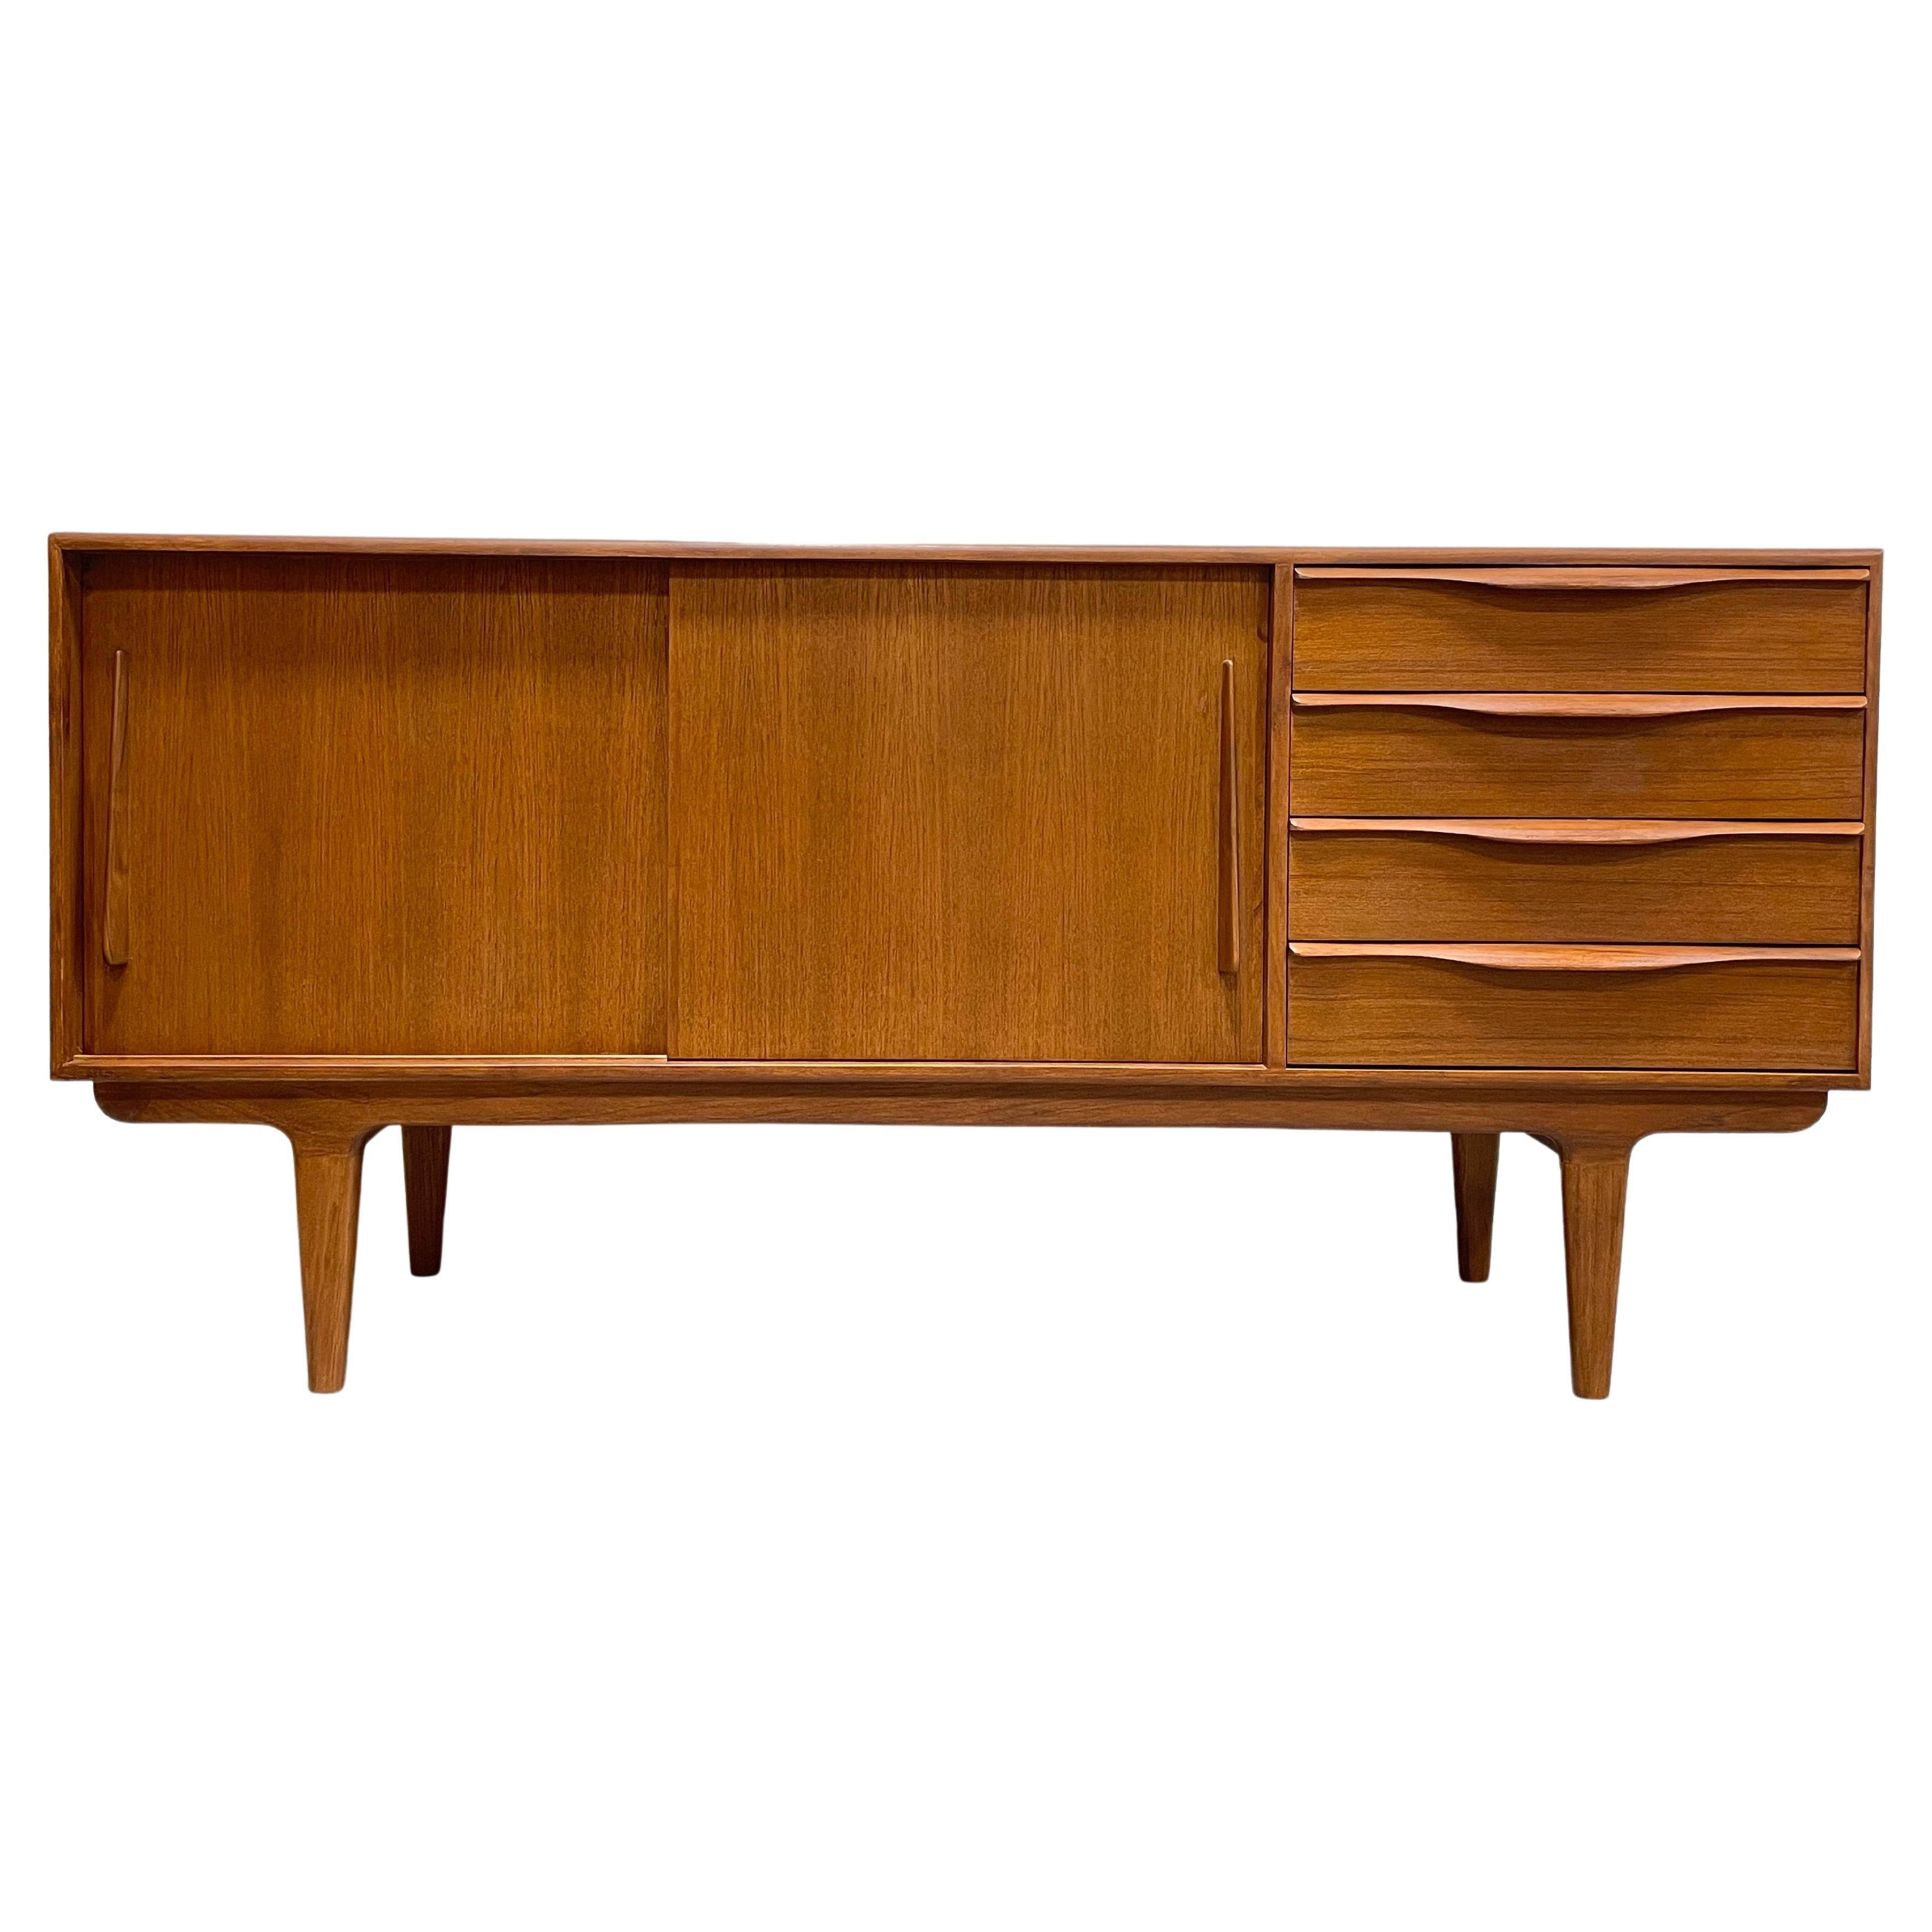 Sculptural Mid-Century Modern Styled Credenza / Media Stand / Sideboard For Sale